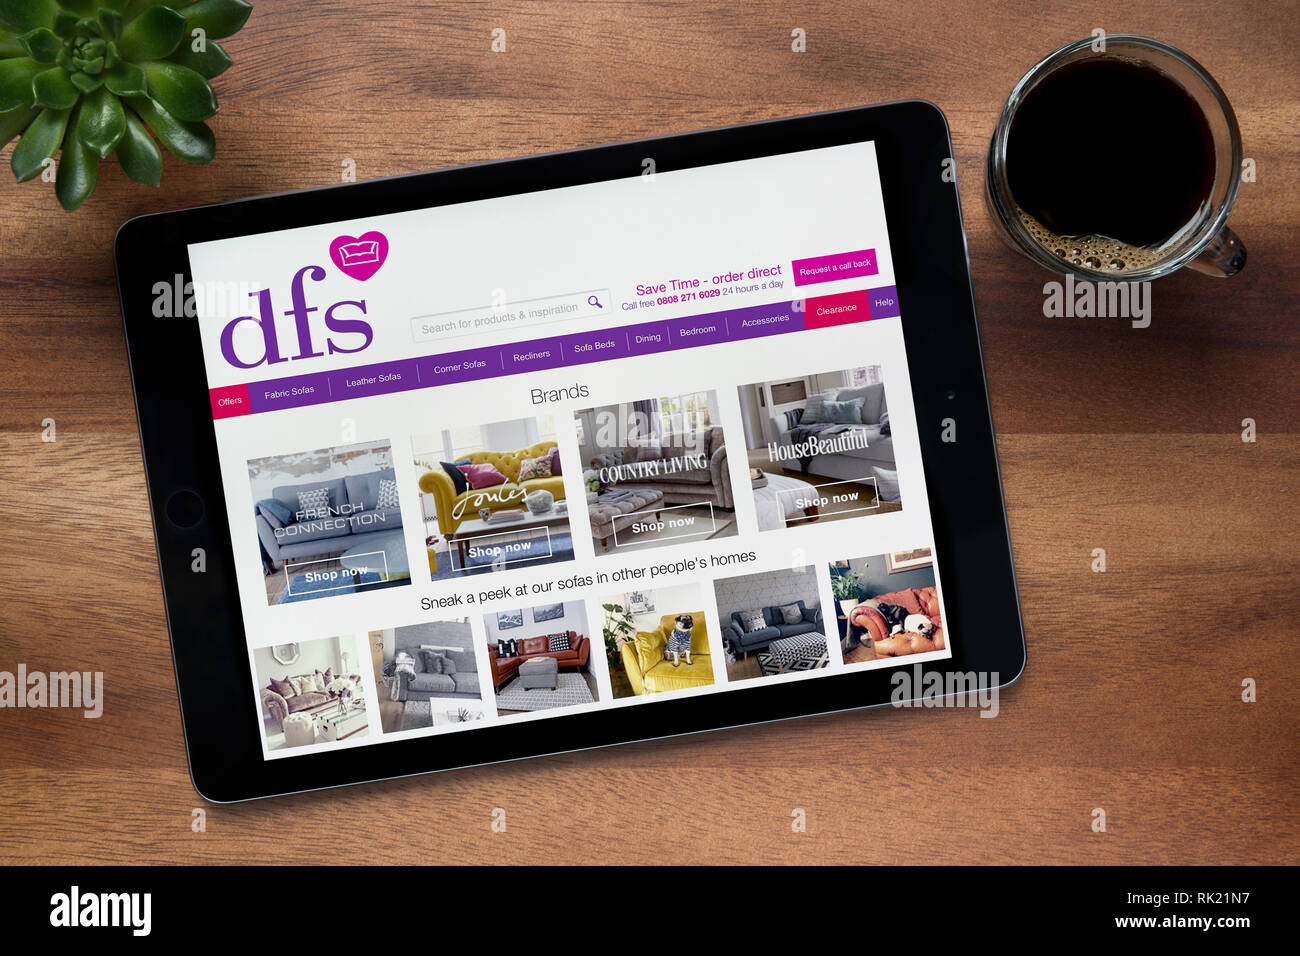 The website of dfs is seen on an iPad tablet, on a wooden table along with an espresso coffee and a house plant (Editorial use only). Stock Photo